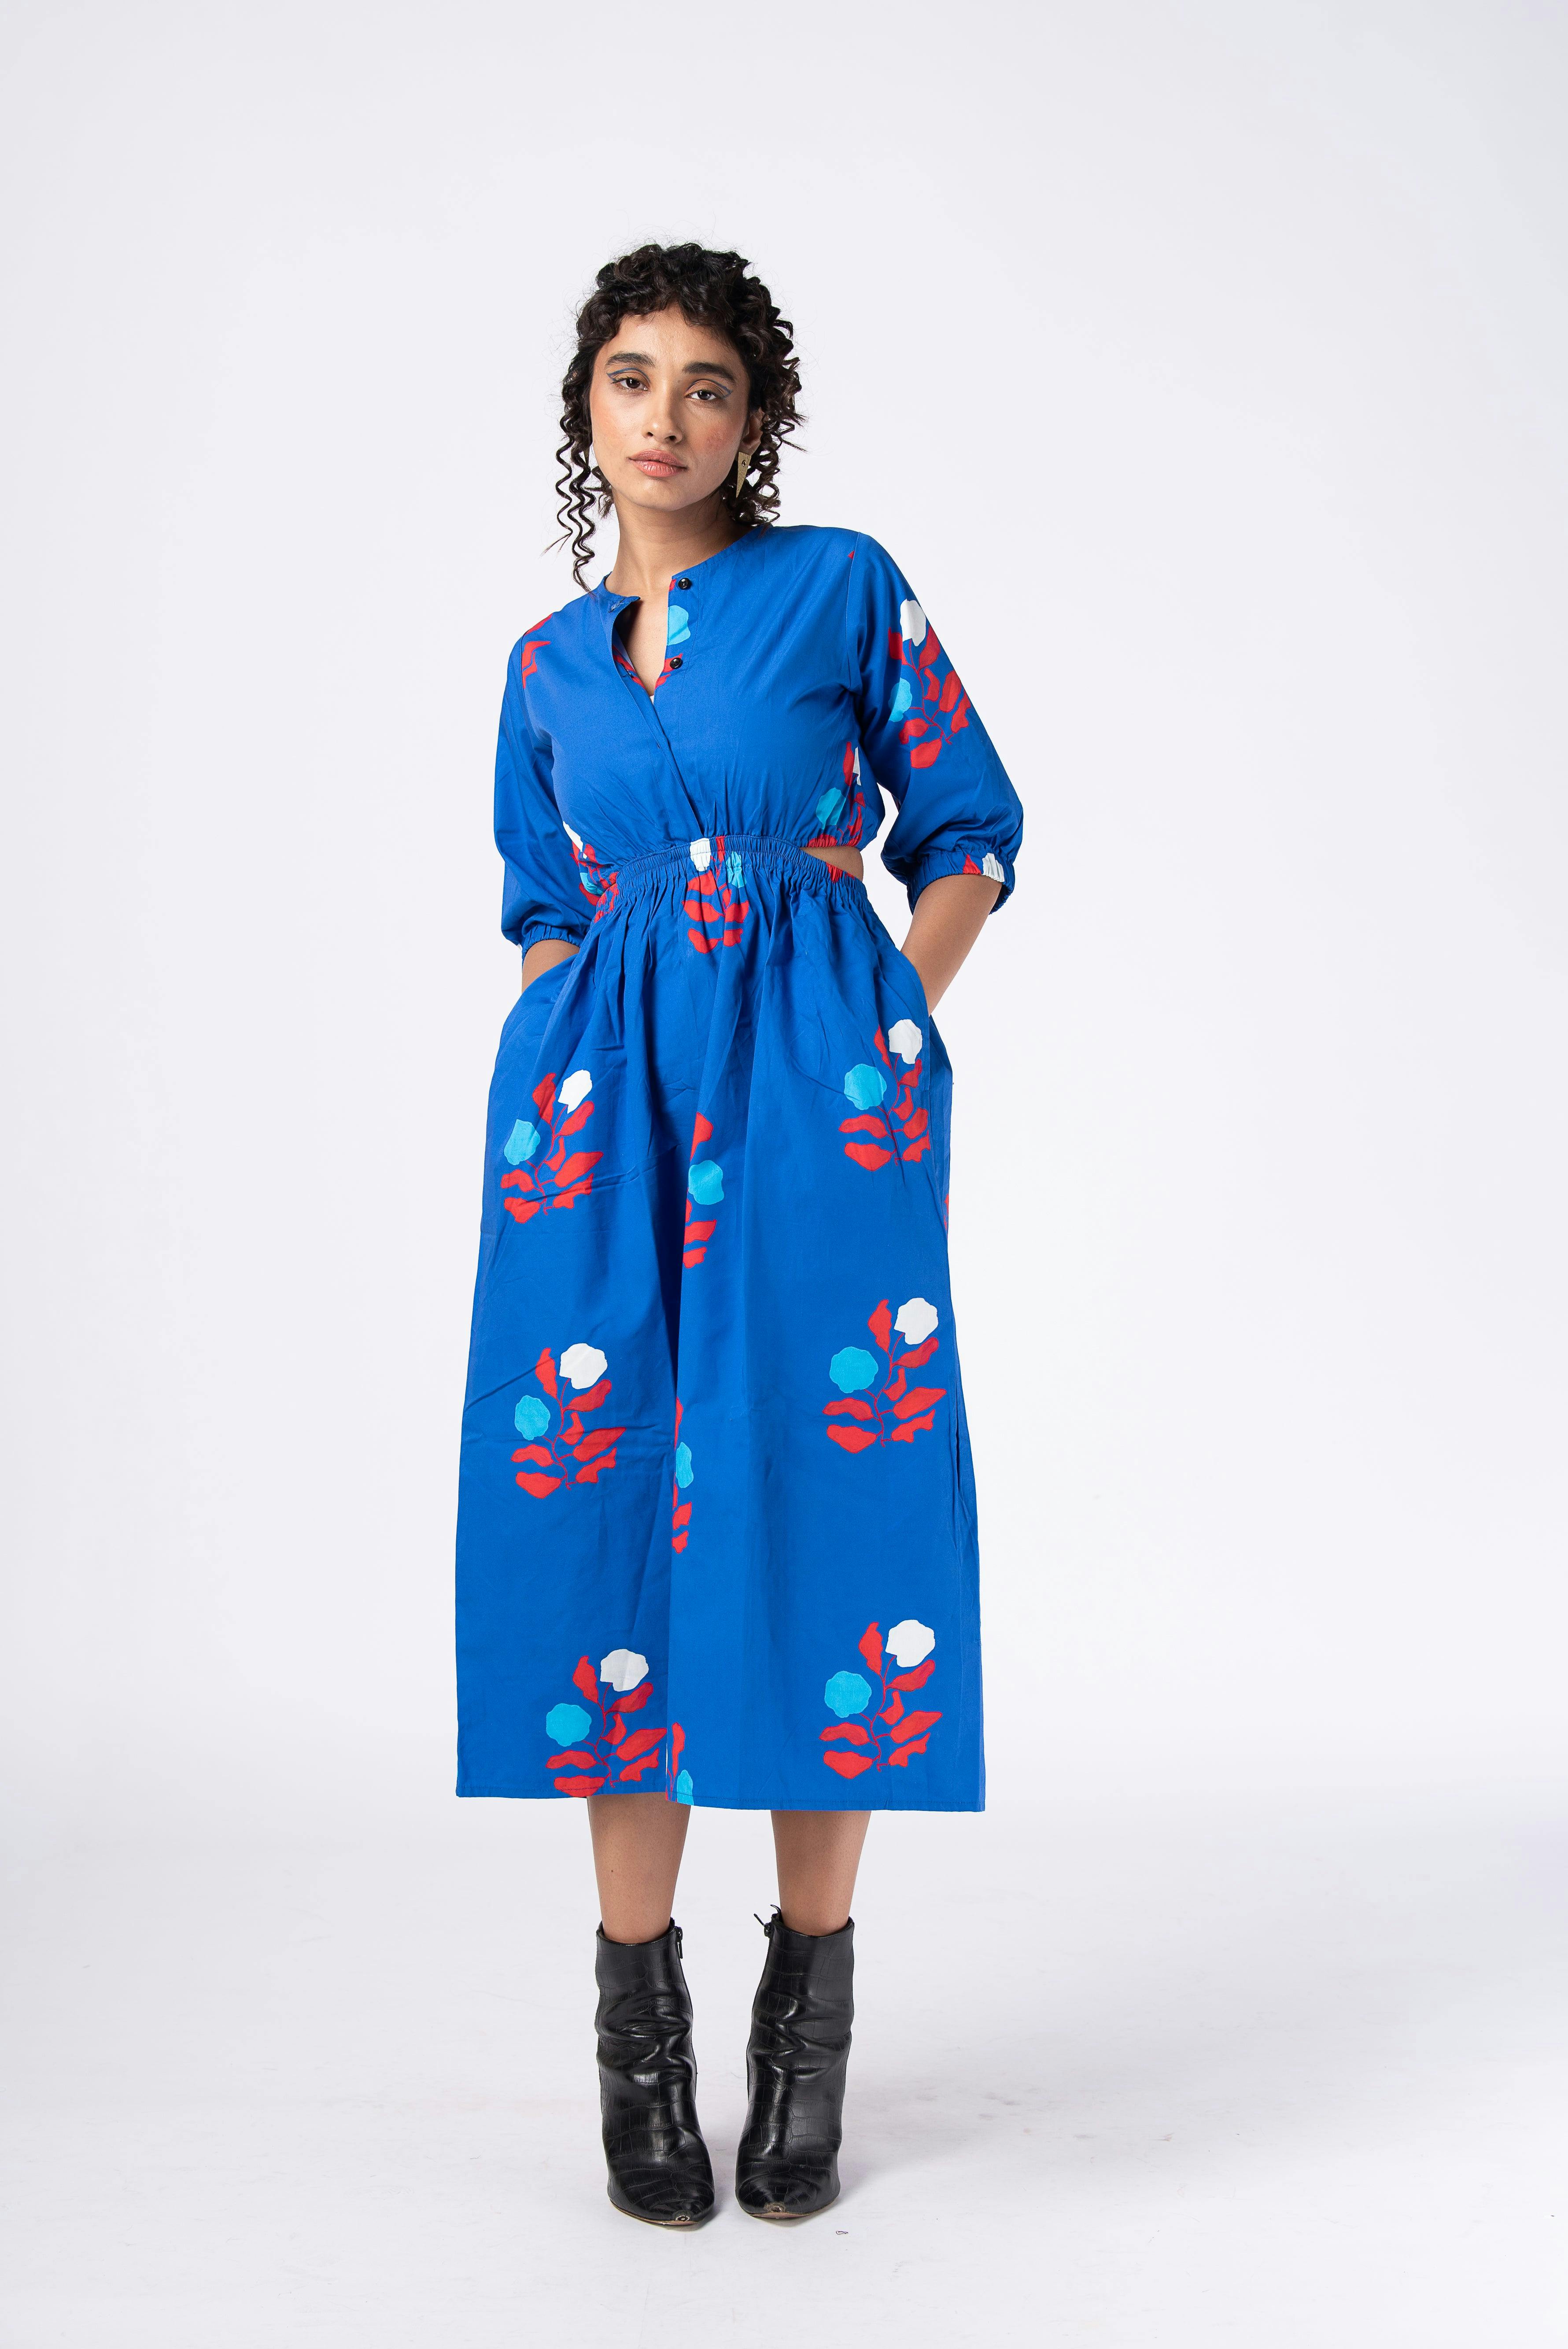 Blooming garden (cut out midi dress), a product by Radharaman